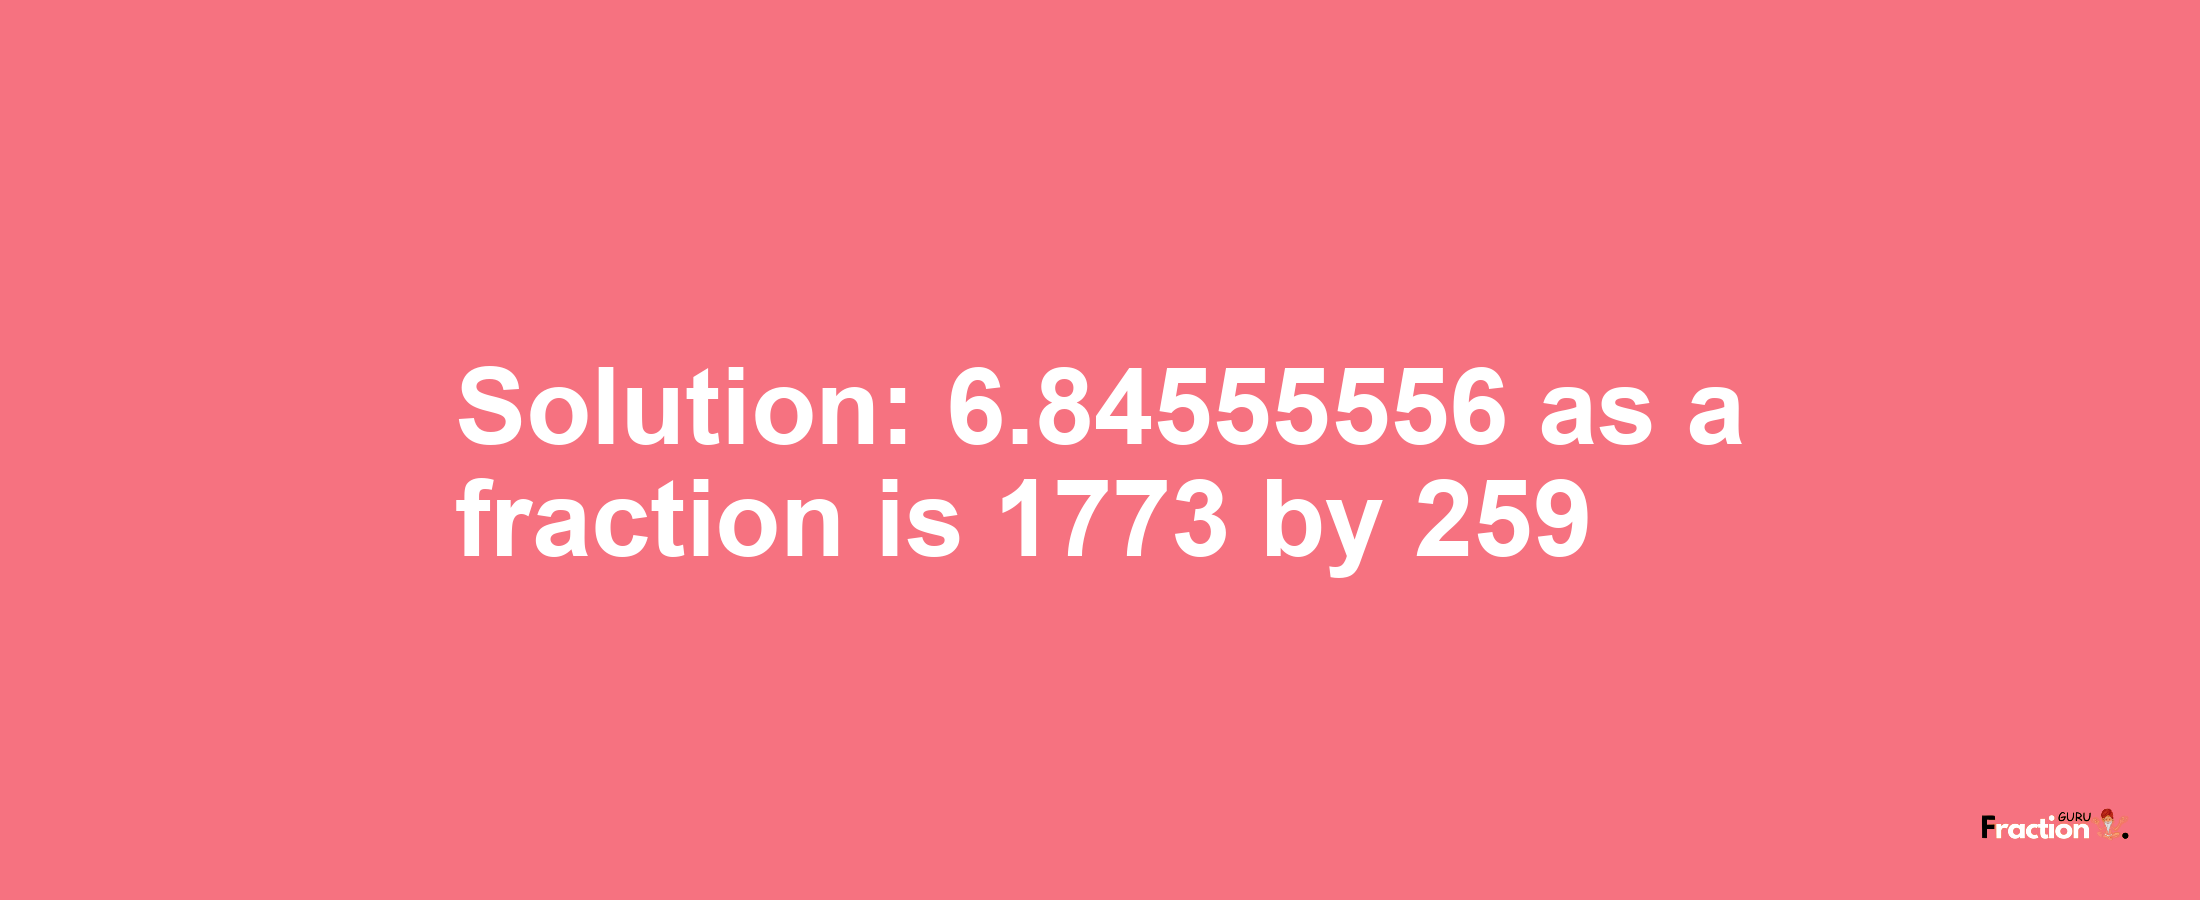 Solution:6.84555556 as a fraction is 1773/259